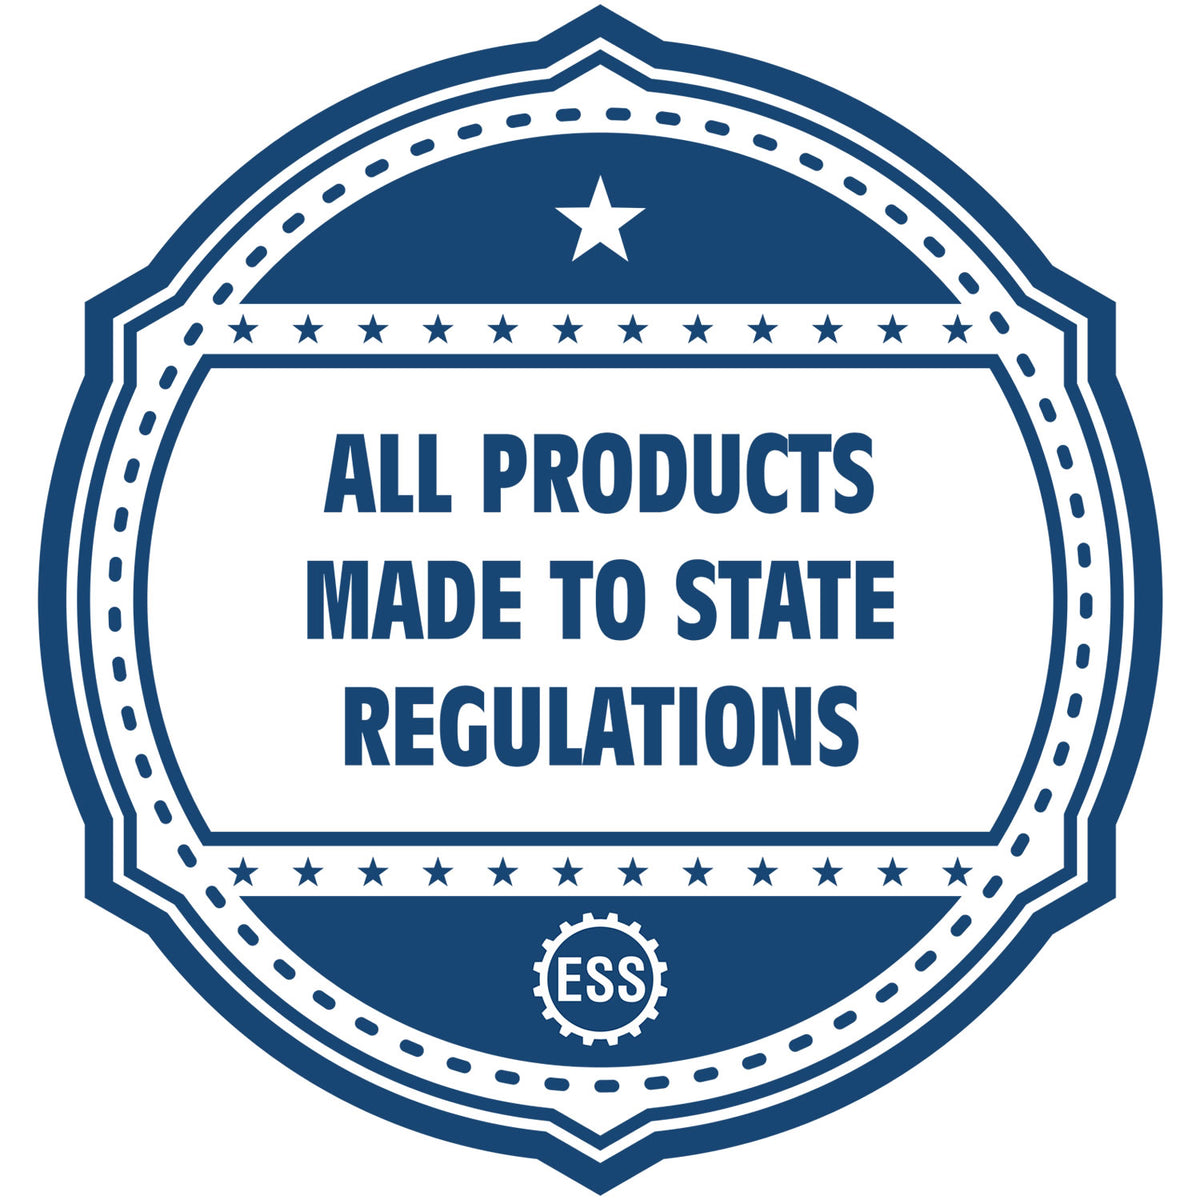 An icon or badge element for the Virginia Landscape Architectural Seal Stamp showing that this product is made in compliance with state regulations.